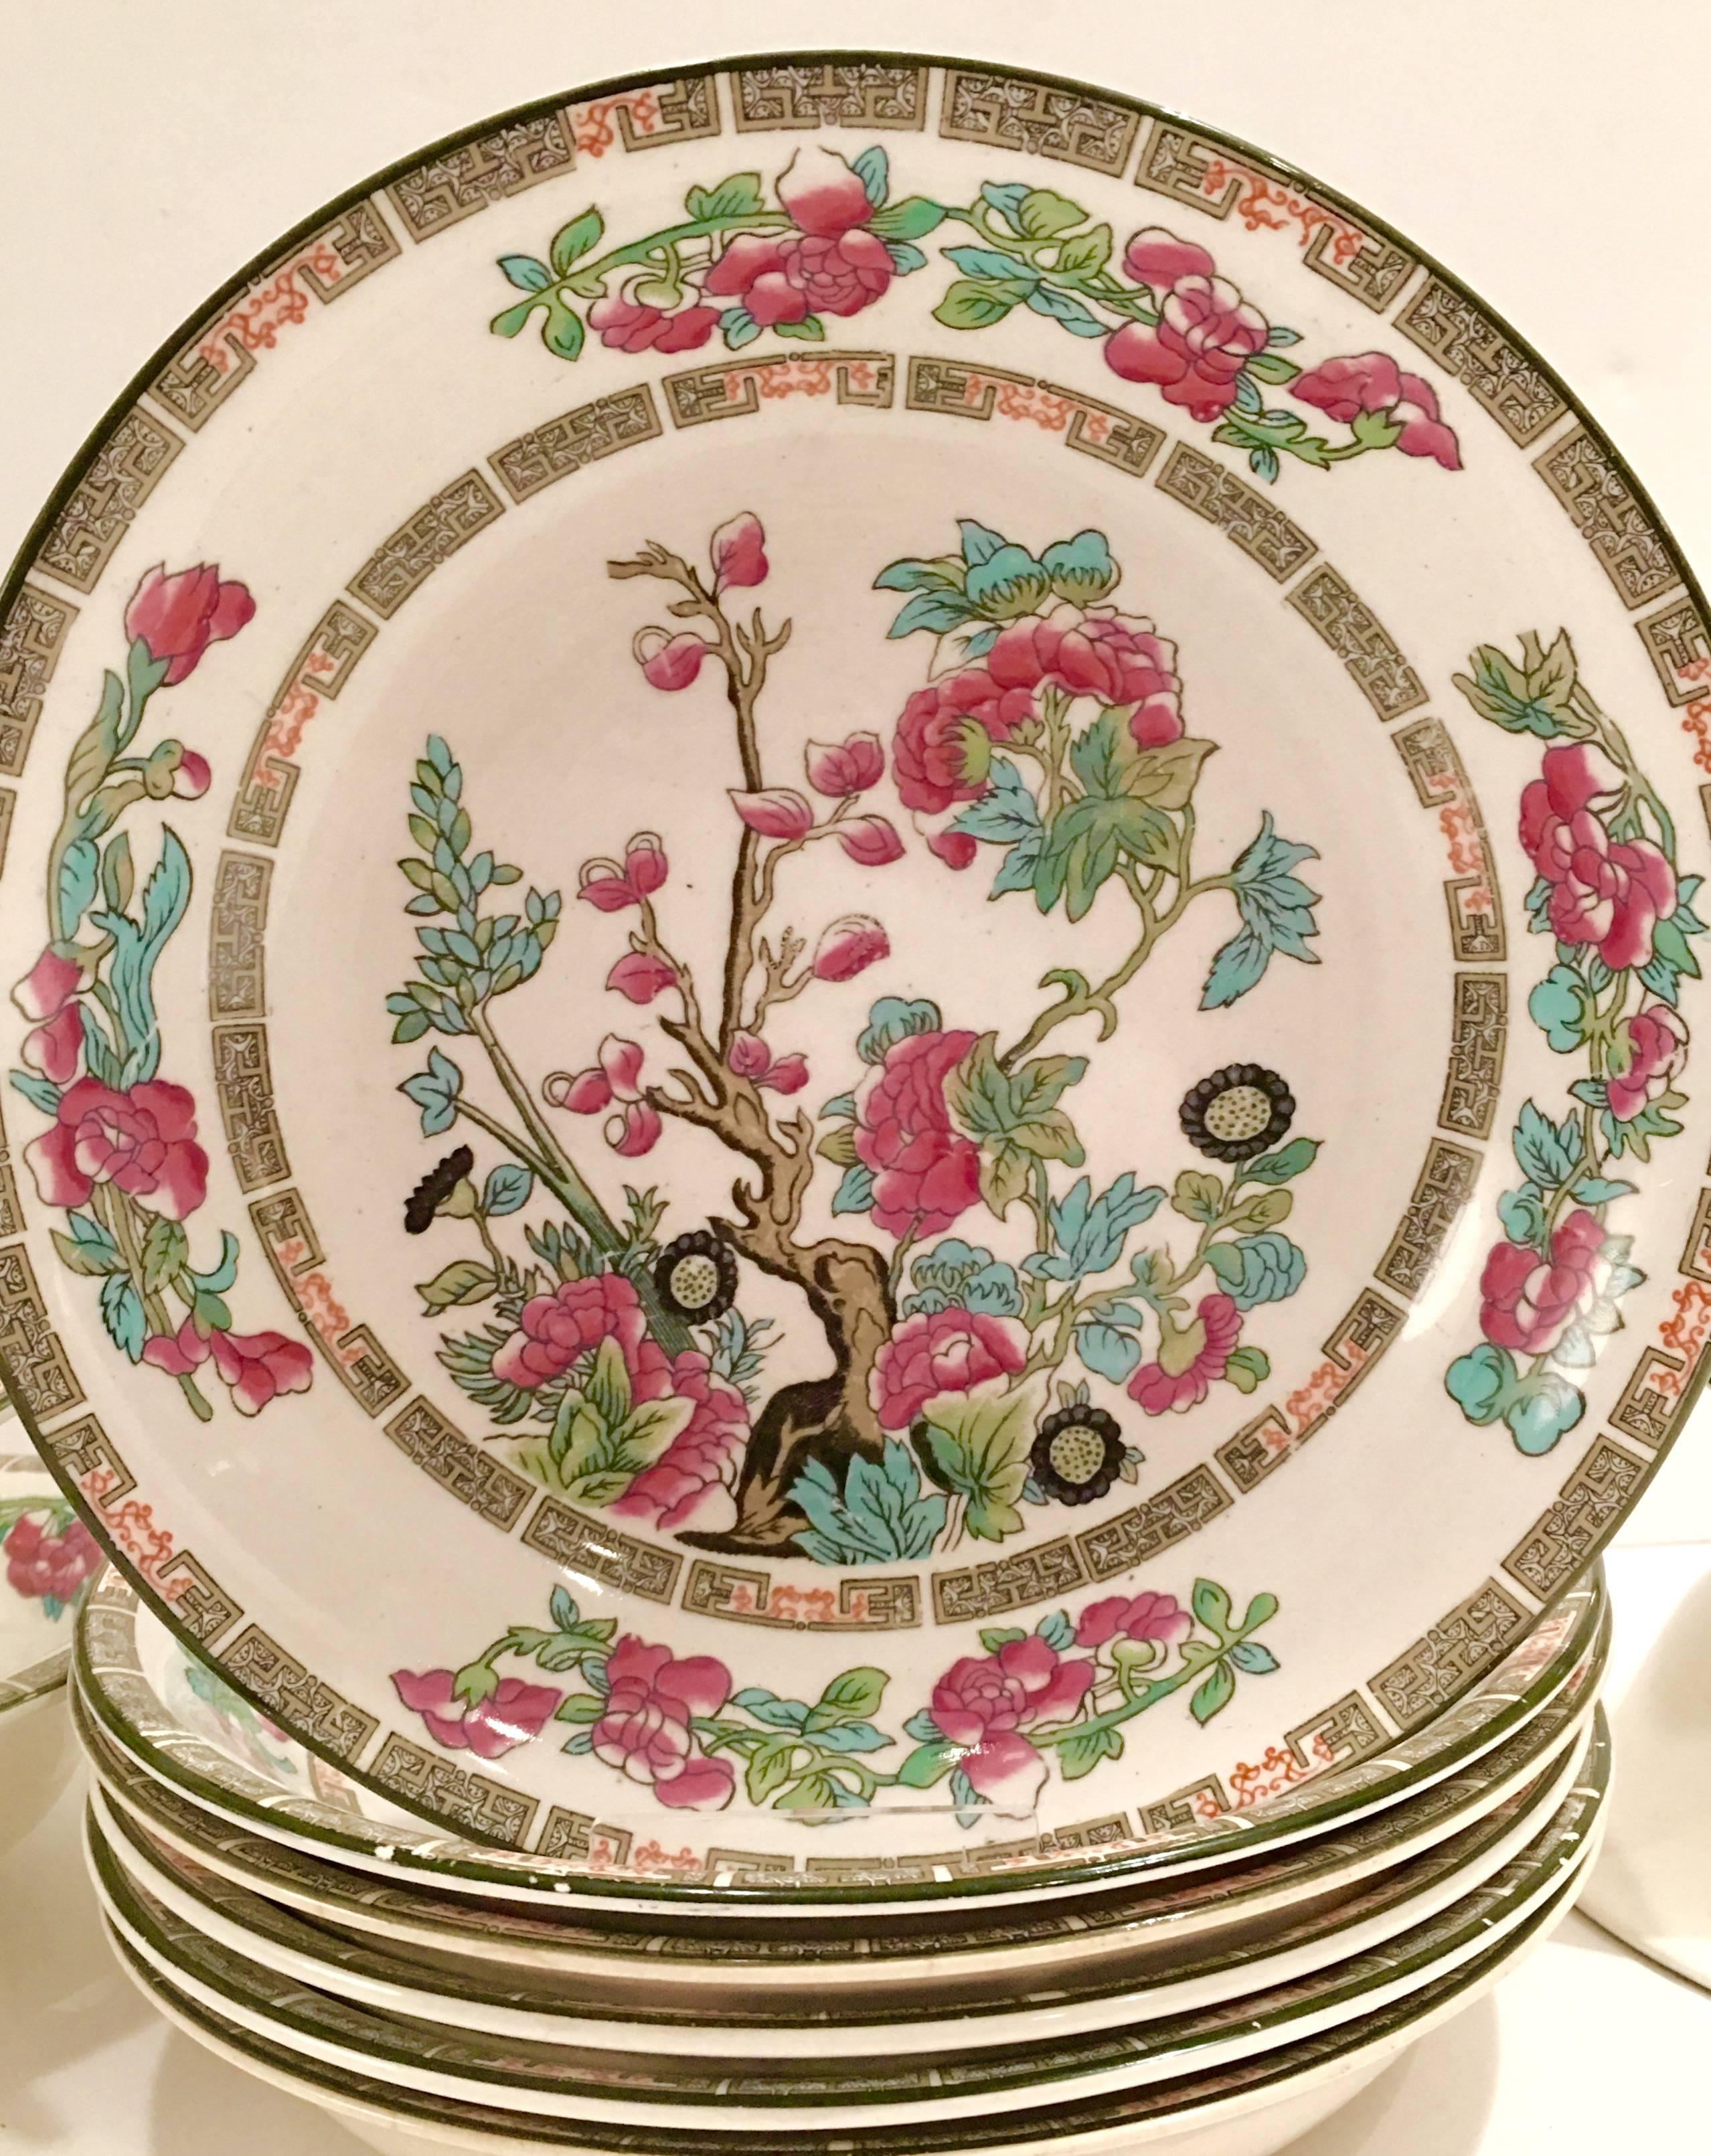 1890's John Maddock & Sons Ltd. England ten-piece set of "Indian Tree" china. Bright white ground with pink, aqua and green floral Chinese trees and a green and coral abstract Greek key detail. Set includes, two large oval vegetable